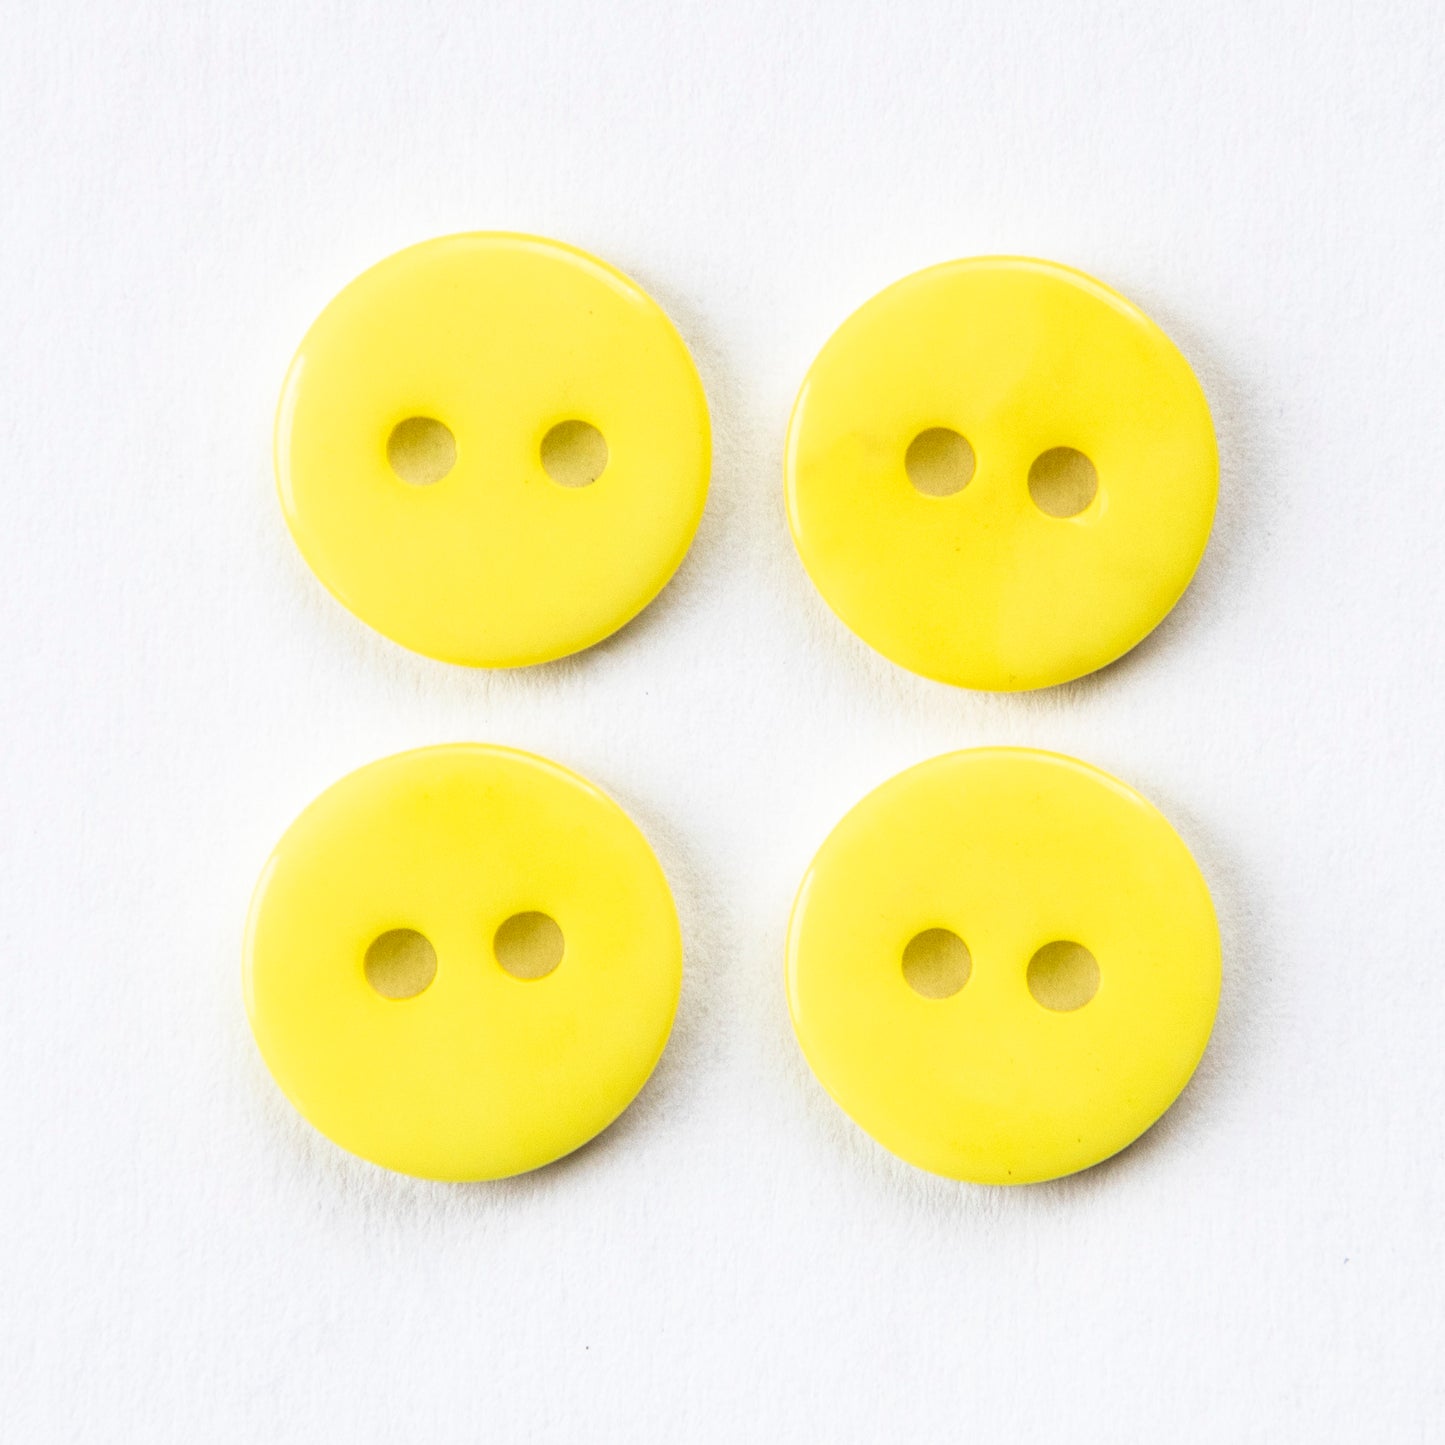 Resin 2 Hole Button - 11mm